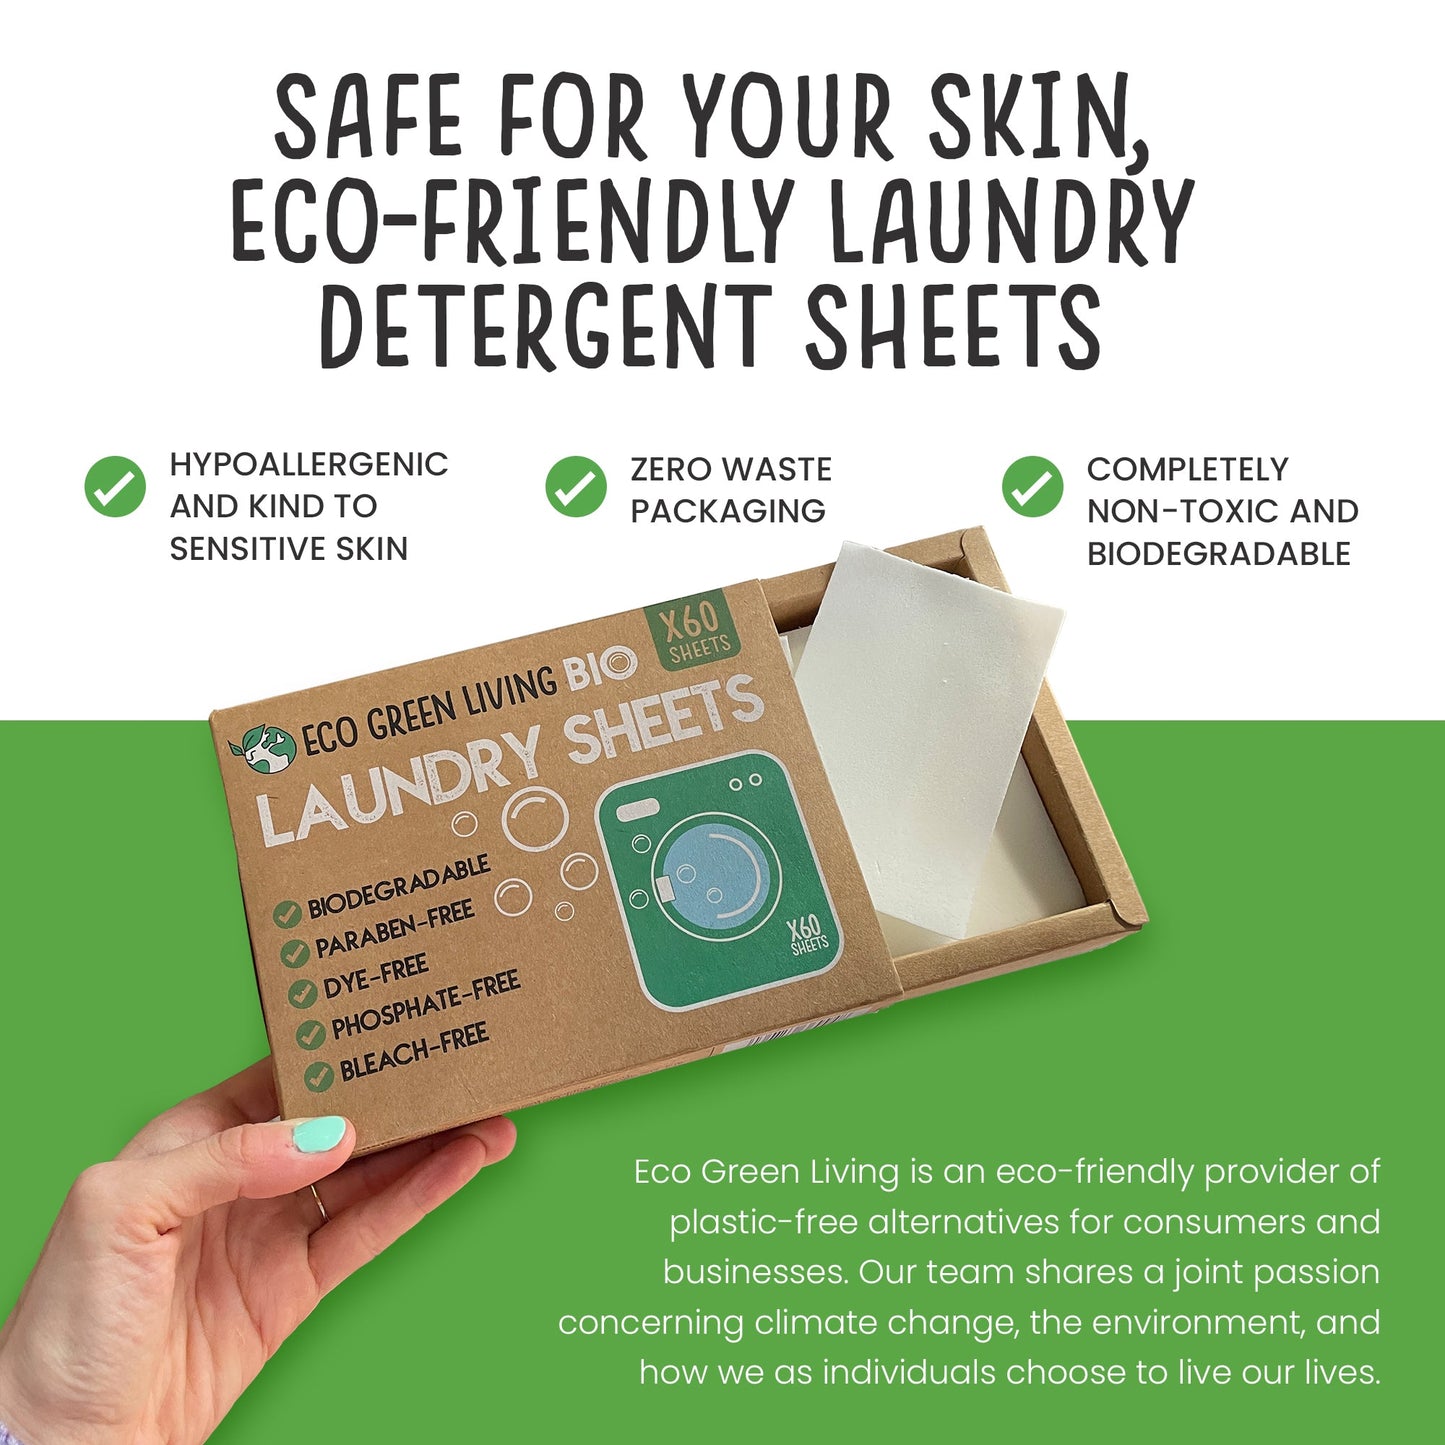 Laundry Detergent Sheets x 60 (Fragrance-Free) Eco Green Living - Eco Green Living